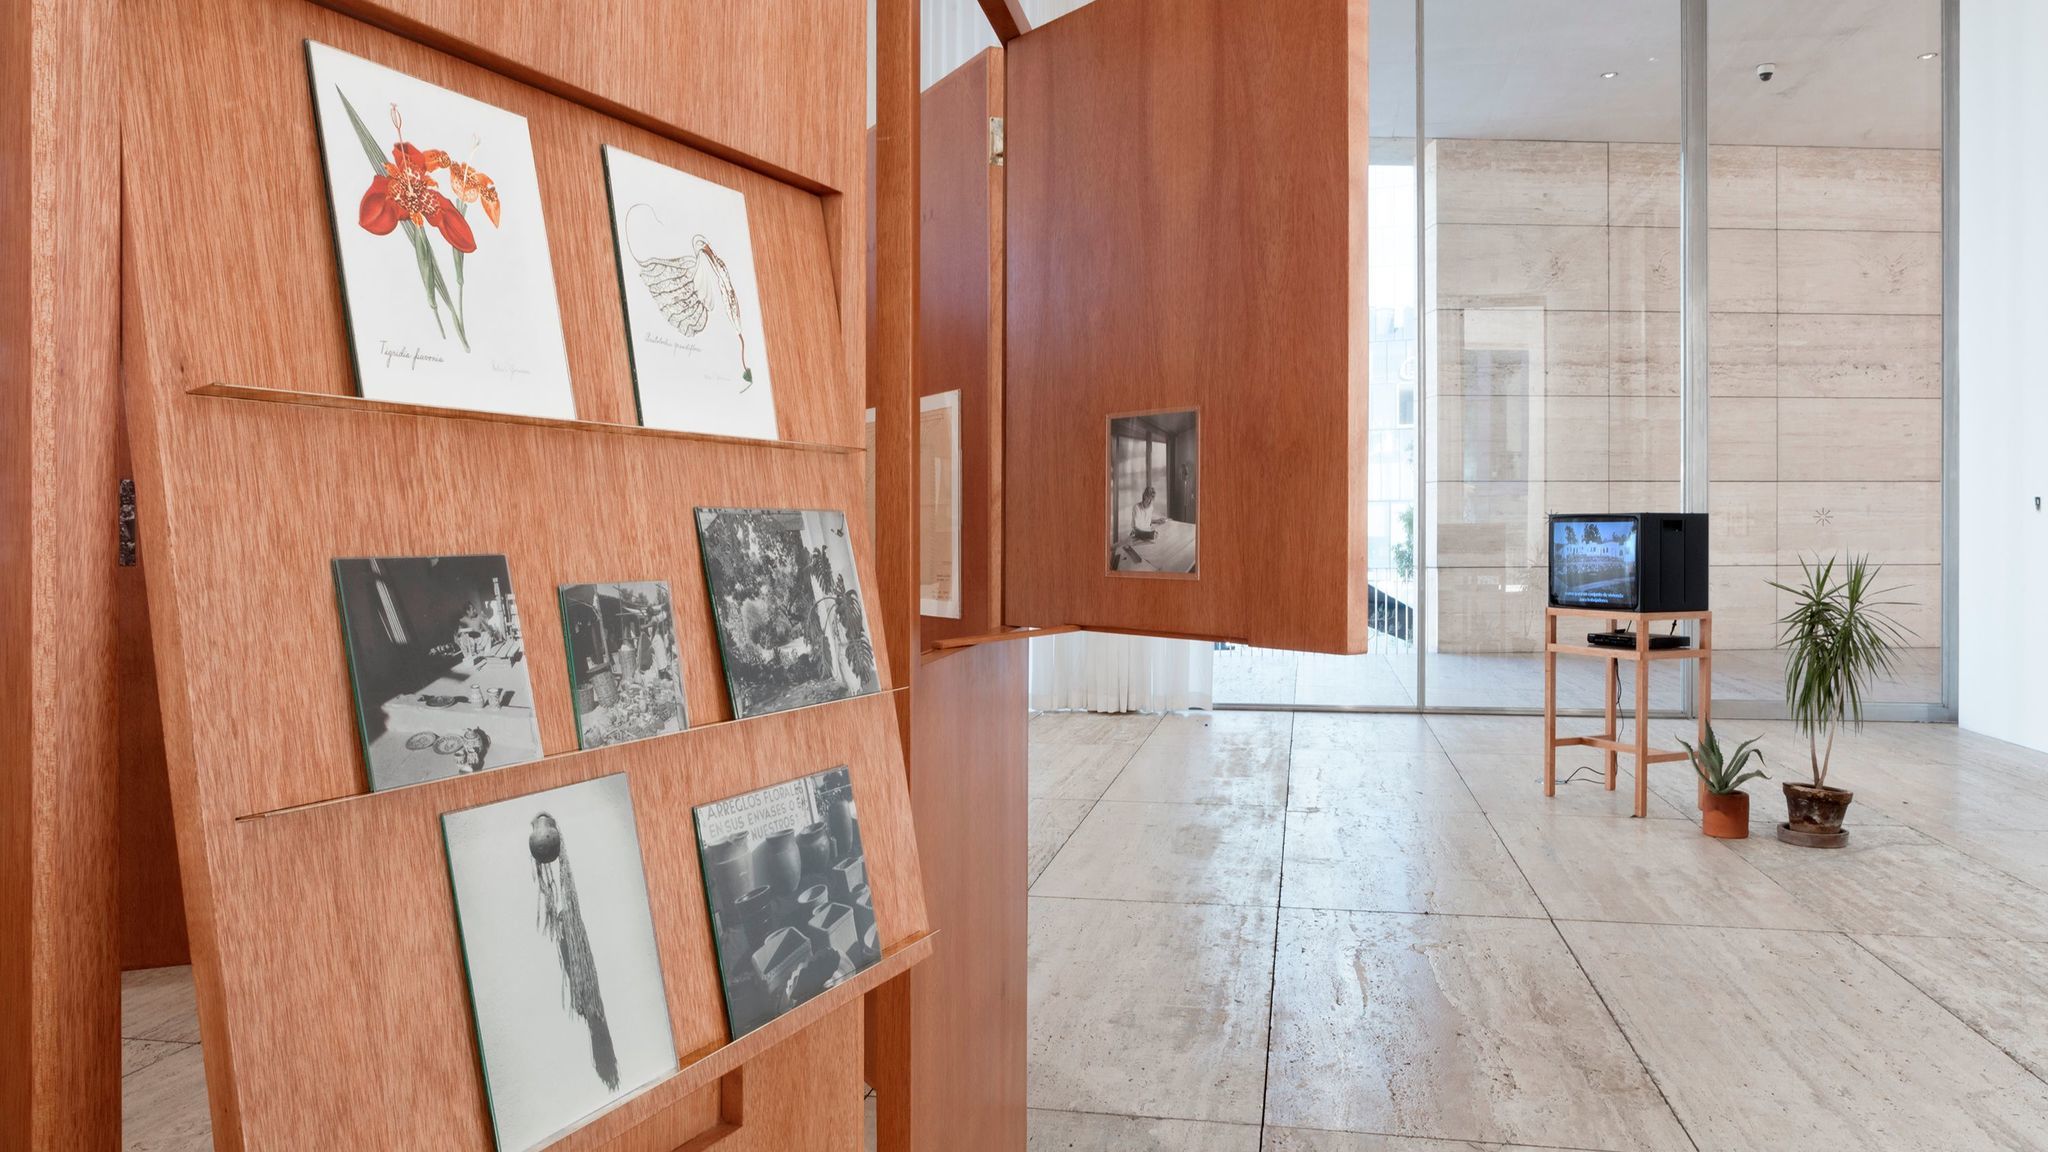 An exhibition devoted to L.A. architecture writer Esther McCoy at the Museo Jumex in Mexico gathers photography, drawings, writings and other ephemera.